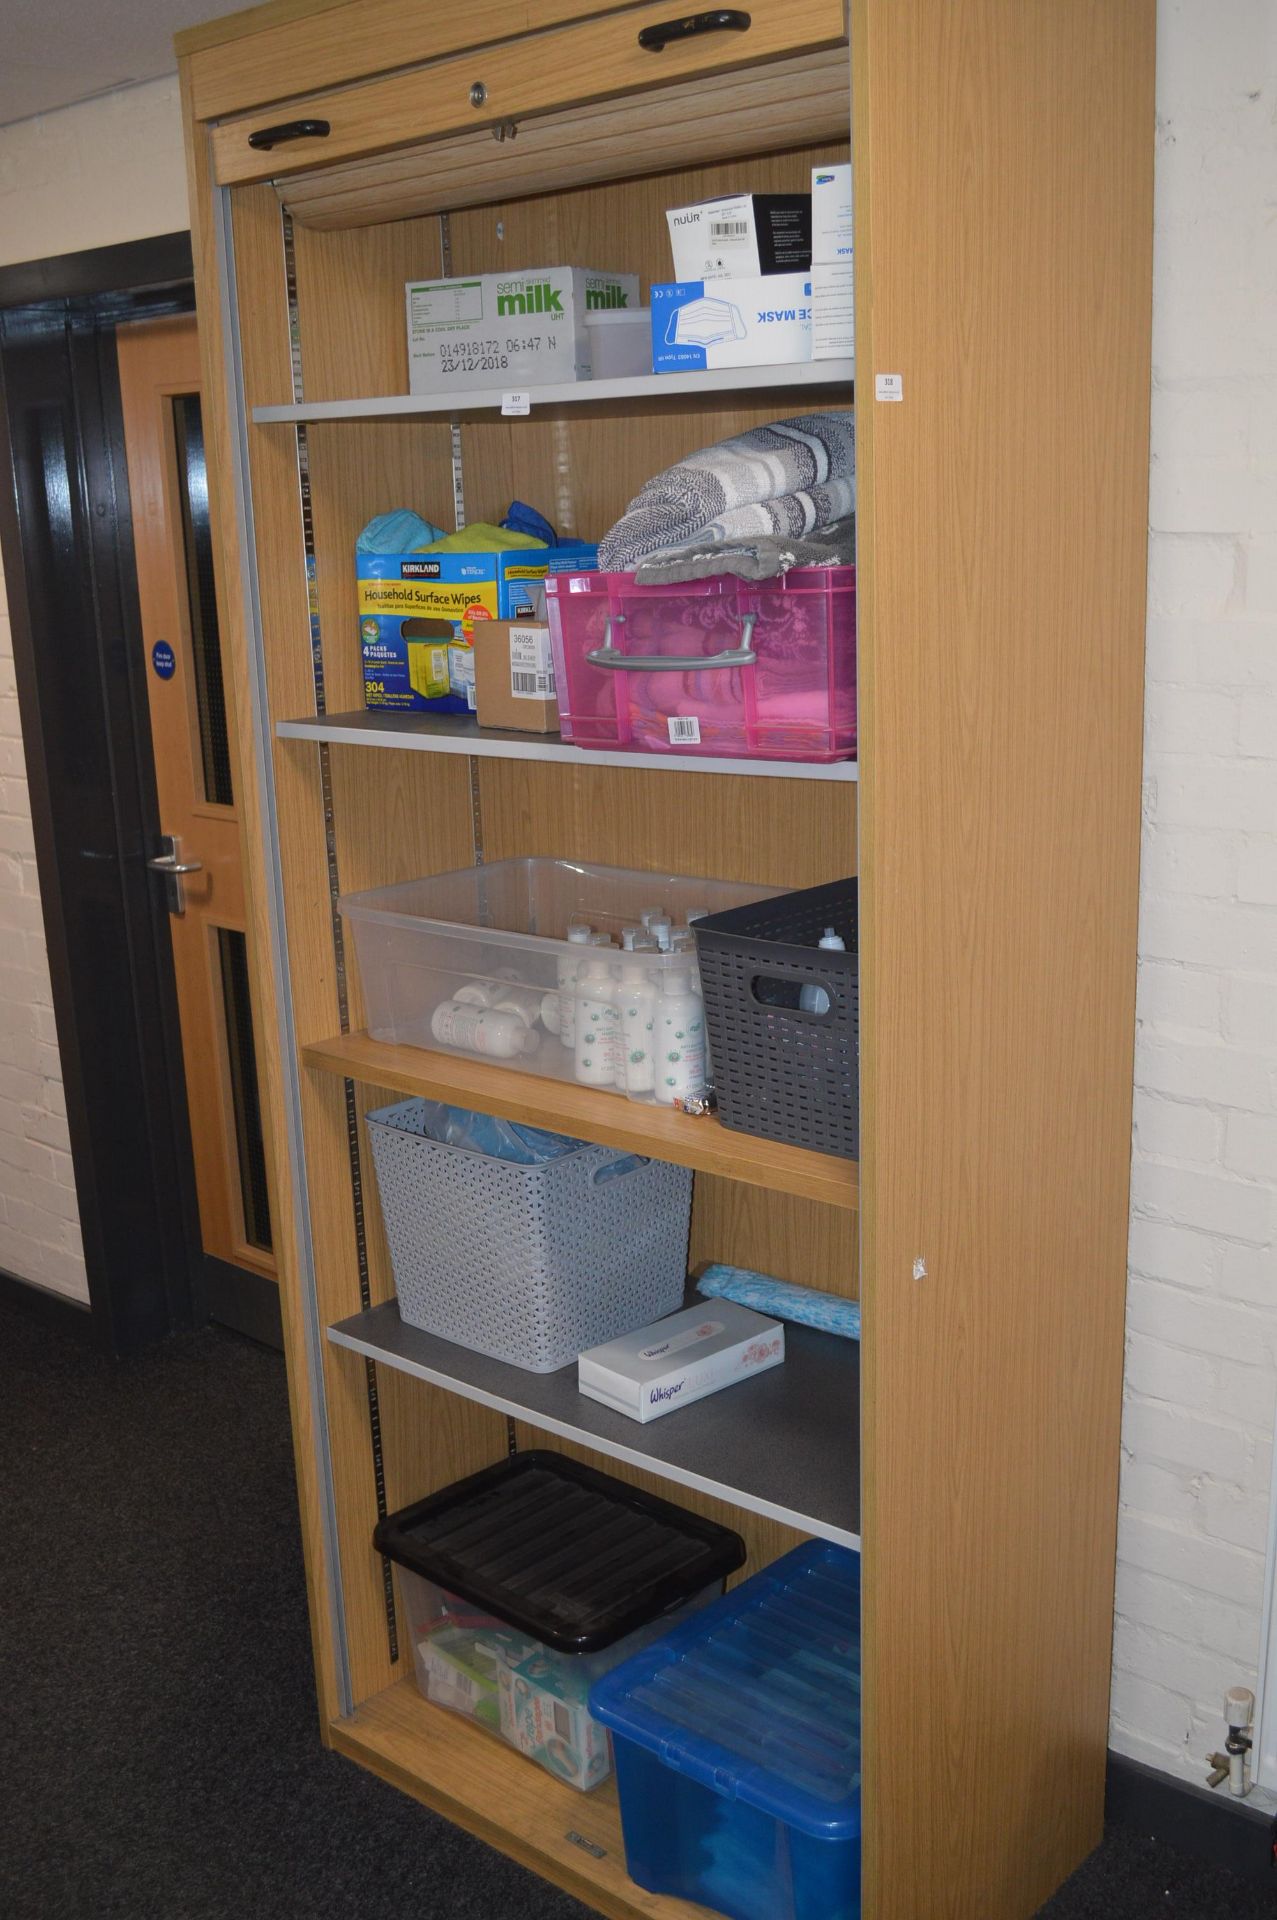 *Contents Cupboard to Include Hand Gels, Tea Towels, Surface Wipes, First Aid Kit, etc.